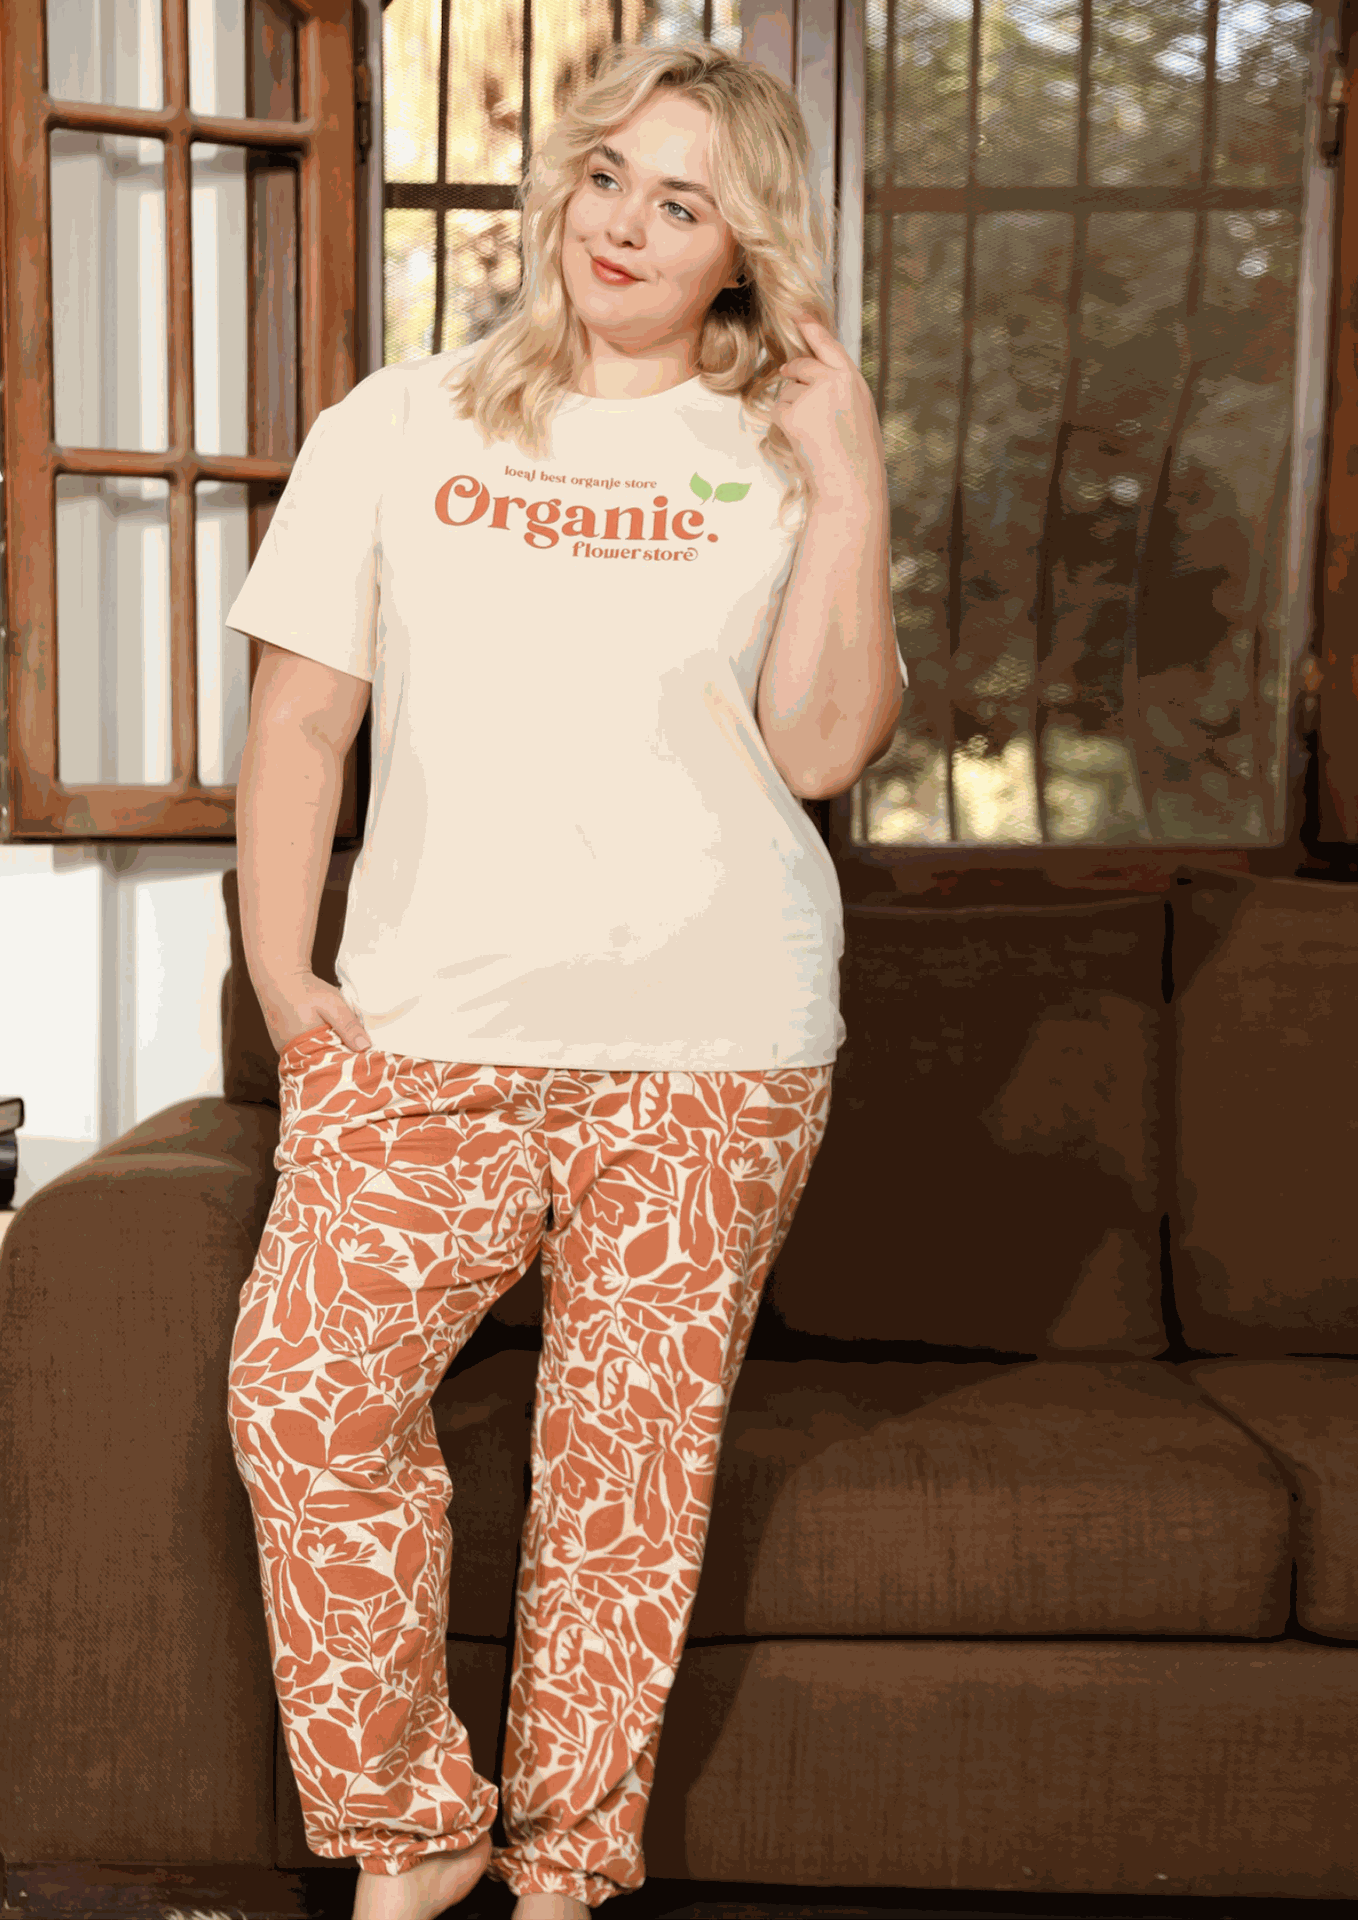 organic flower store Women's pajamas with half-sleeved T-shirt and printed pants